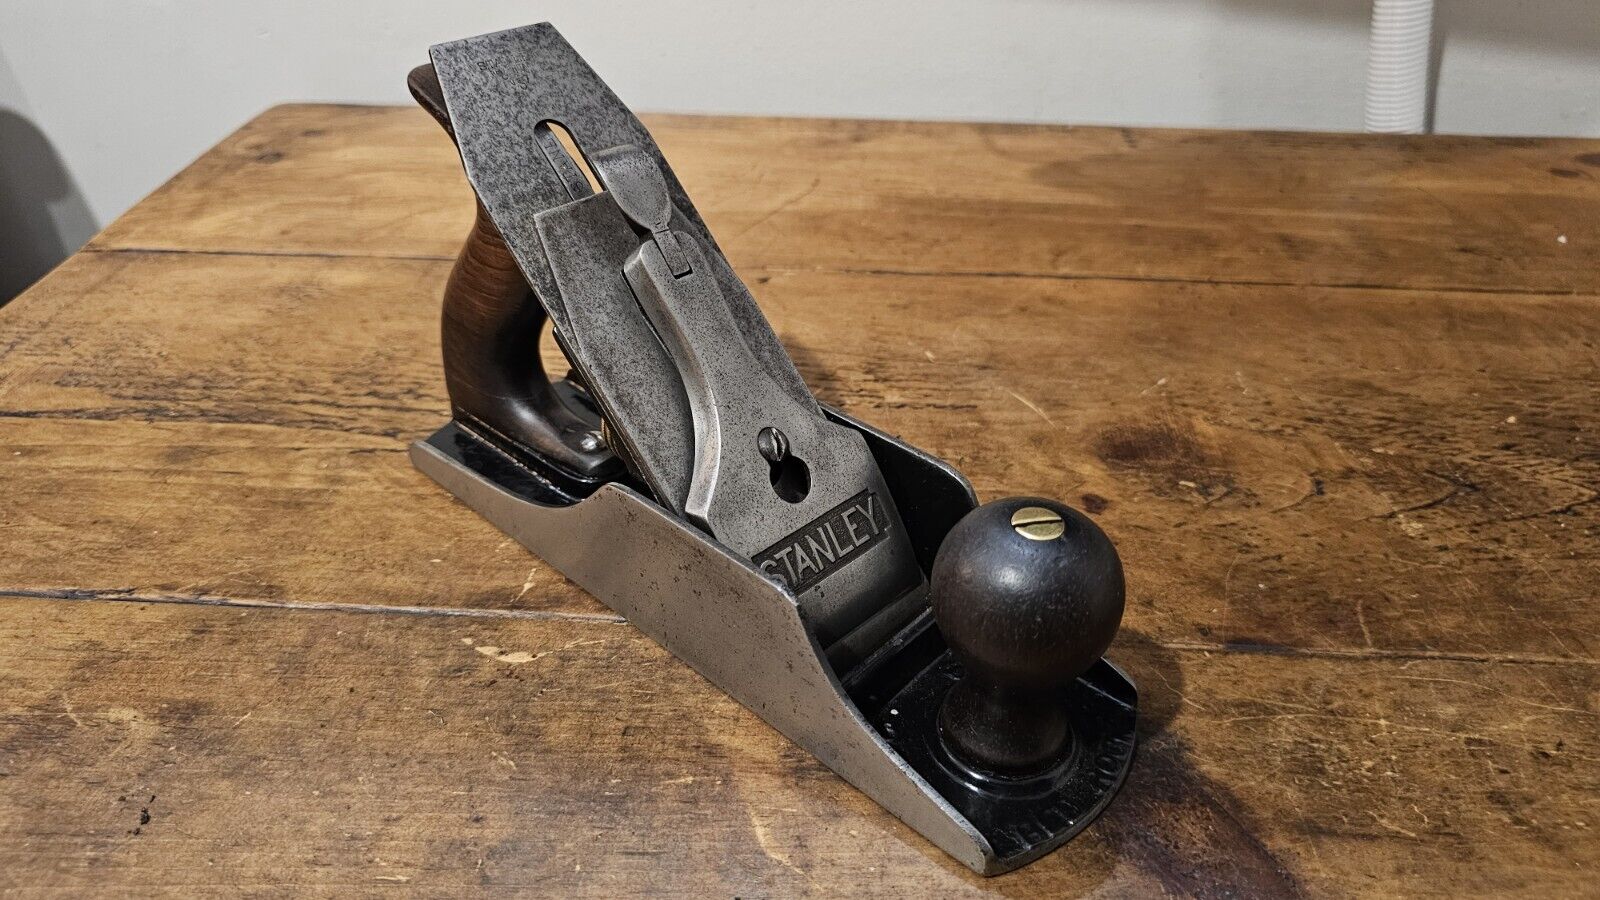 Stanley Bedrock 604 1/2 Plane. Type 8, Made in USA.